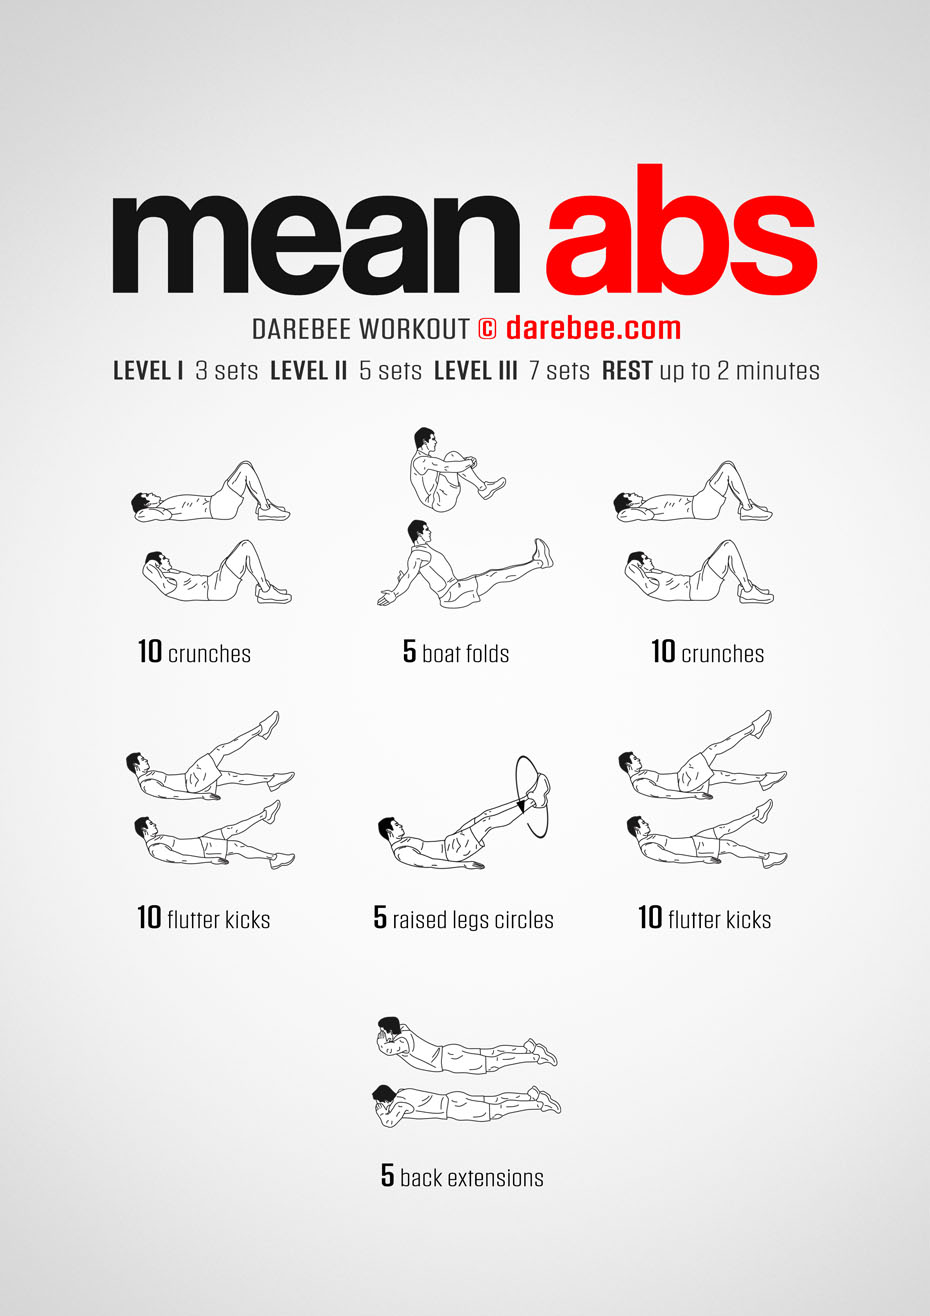 Mean Abs is a DAREBEE home fitness abdominal muscle groups, no-equipment workout that will give you stronger abs.